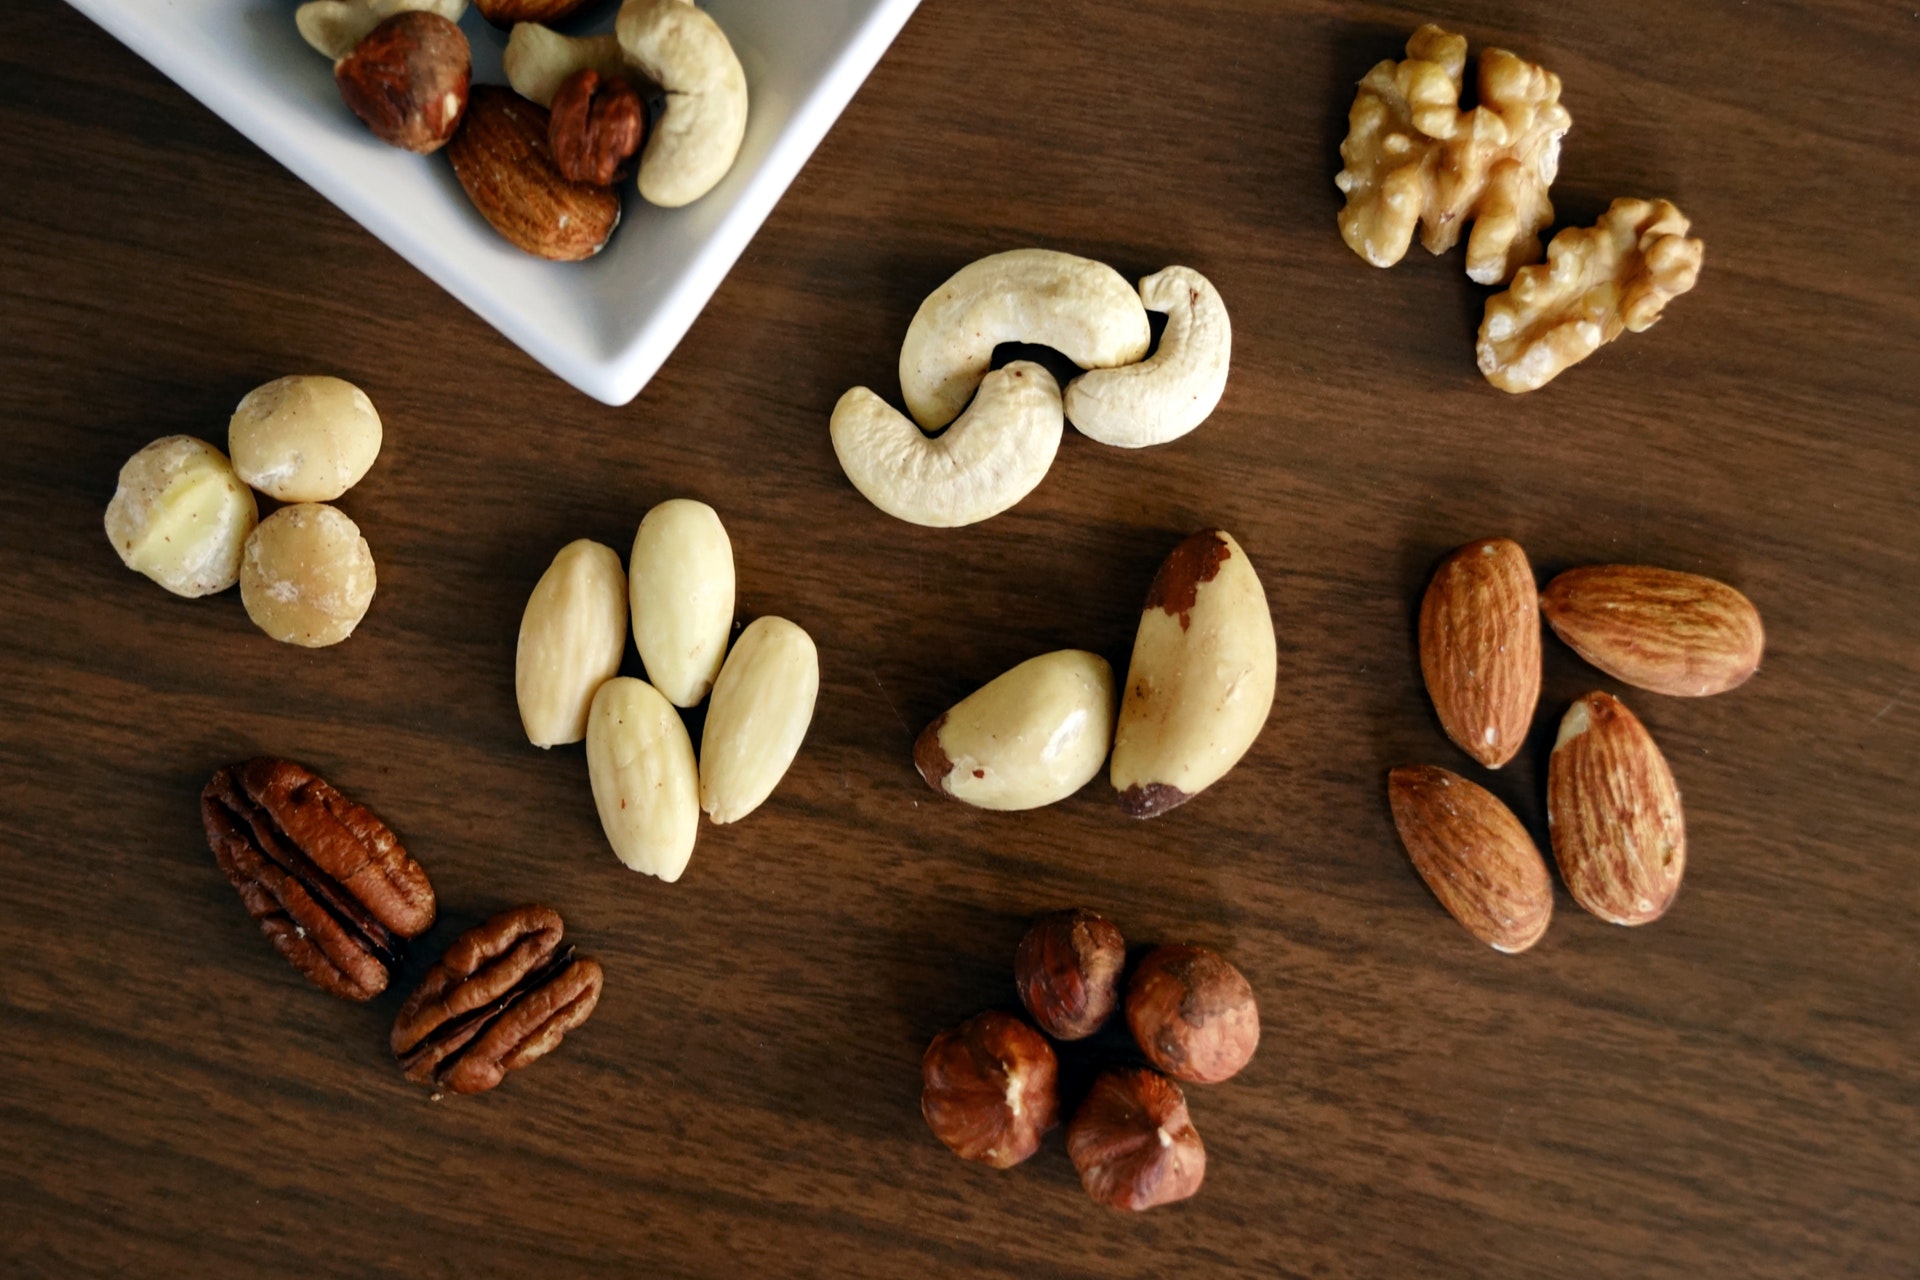 Nuts can keep your body healthy